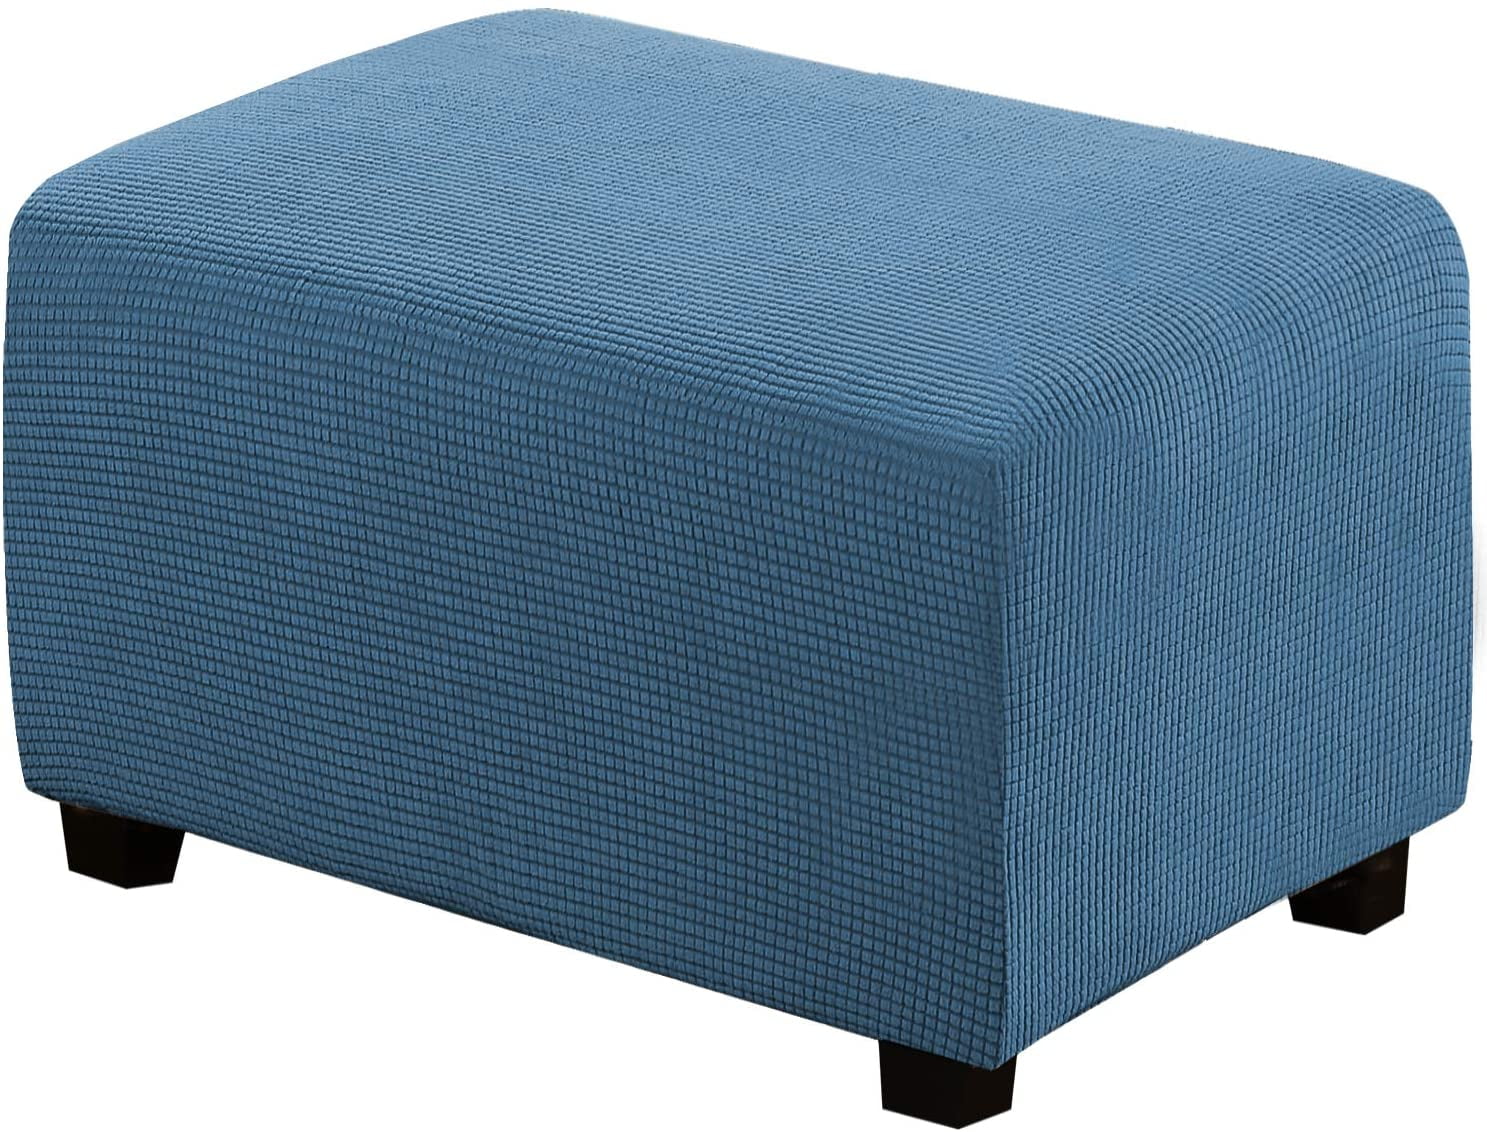 Stretch Grid Fabric Ottoman Cover Storage Footrest Stool Slipcover Protector 